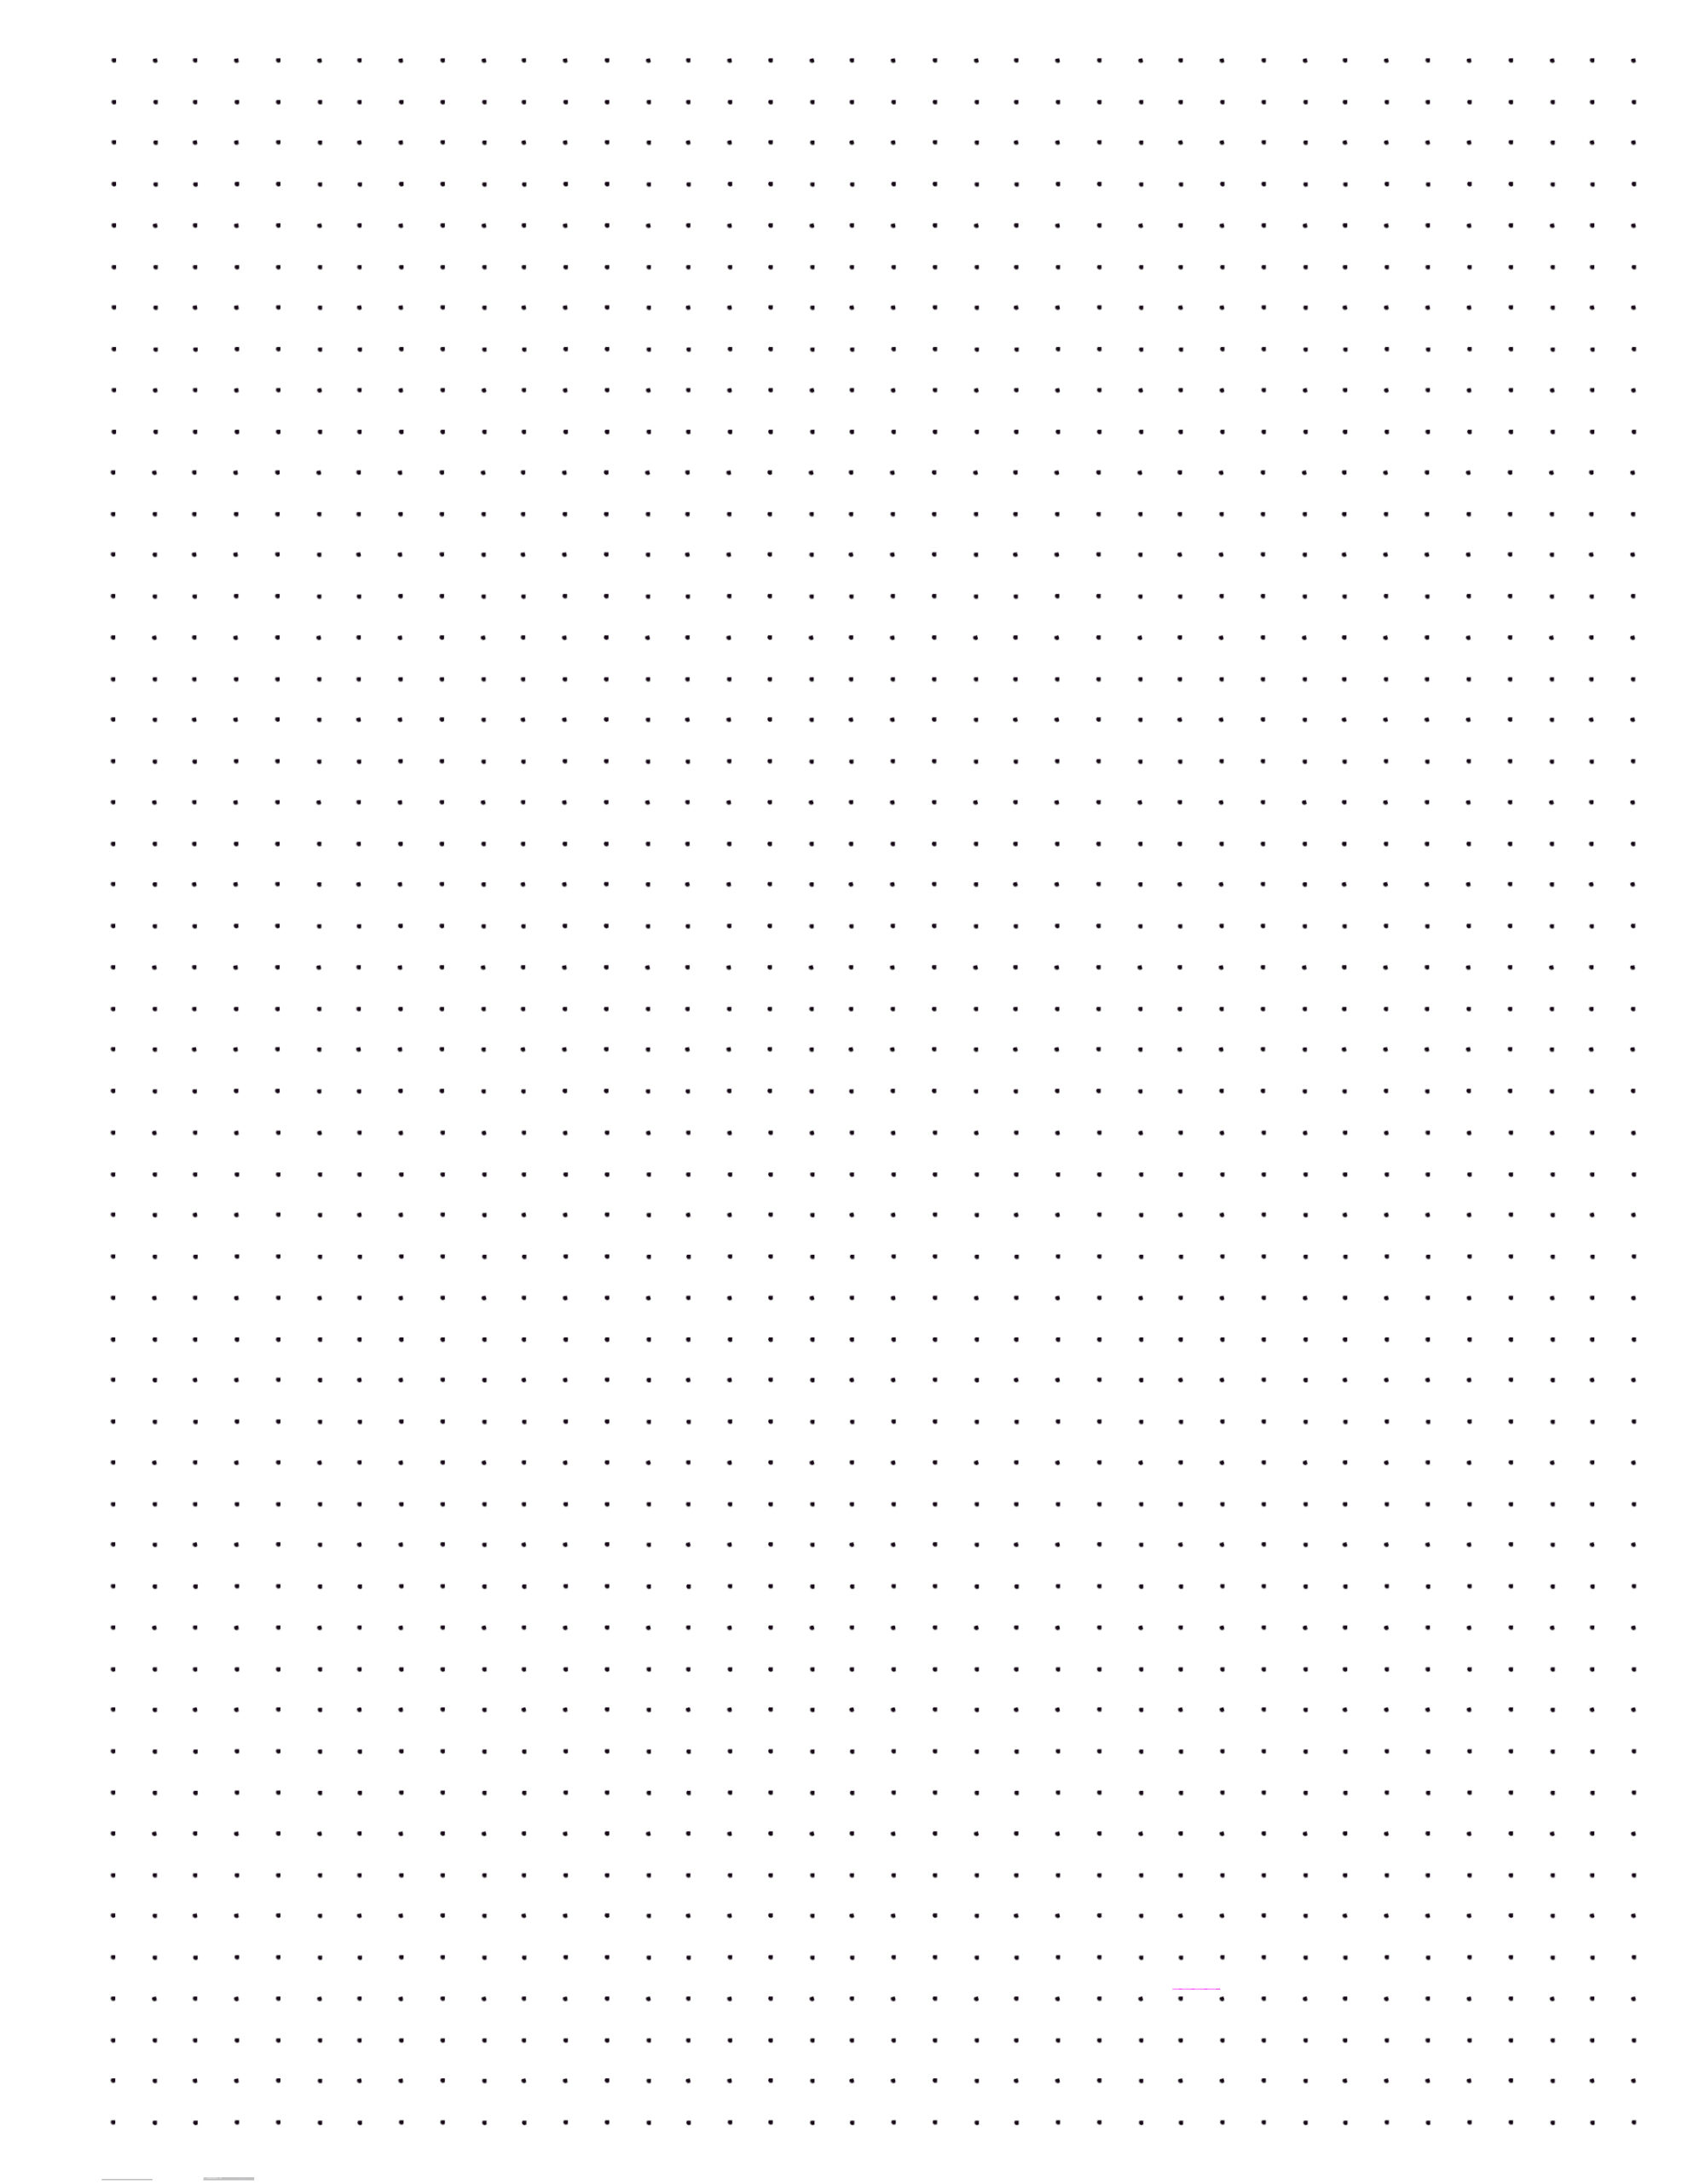 free-printable-dot-grid-paper-discover-the-beauty-of-printable-paper